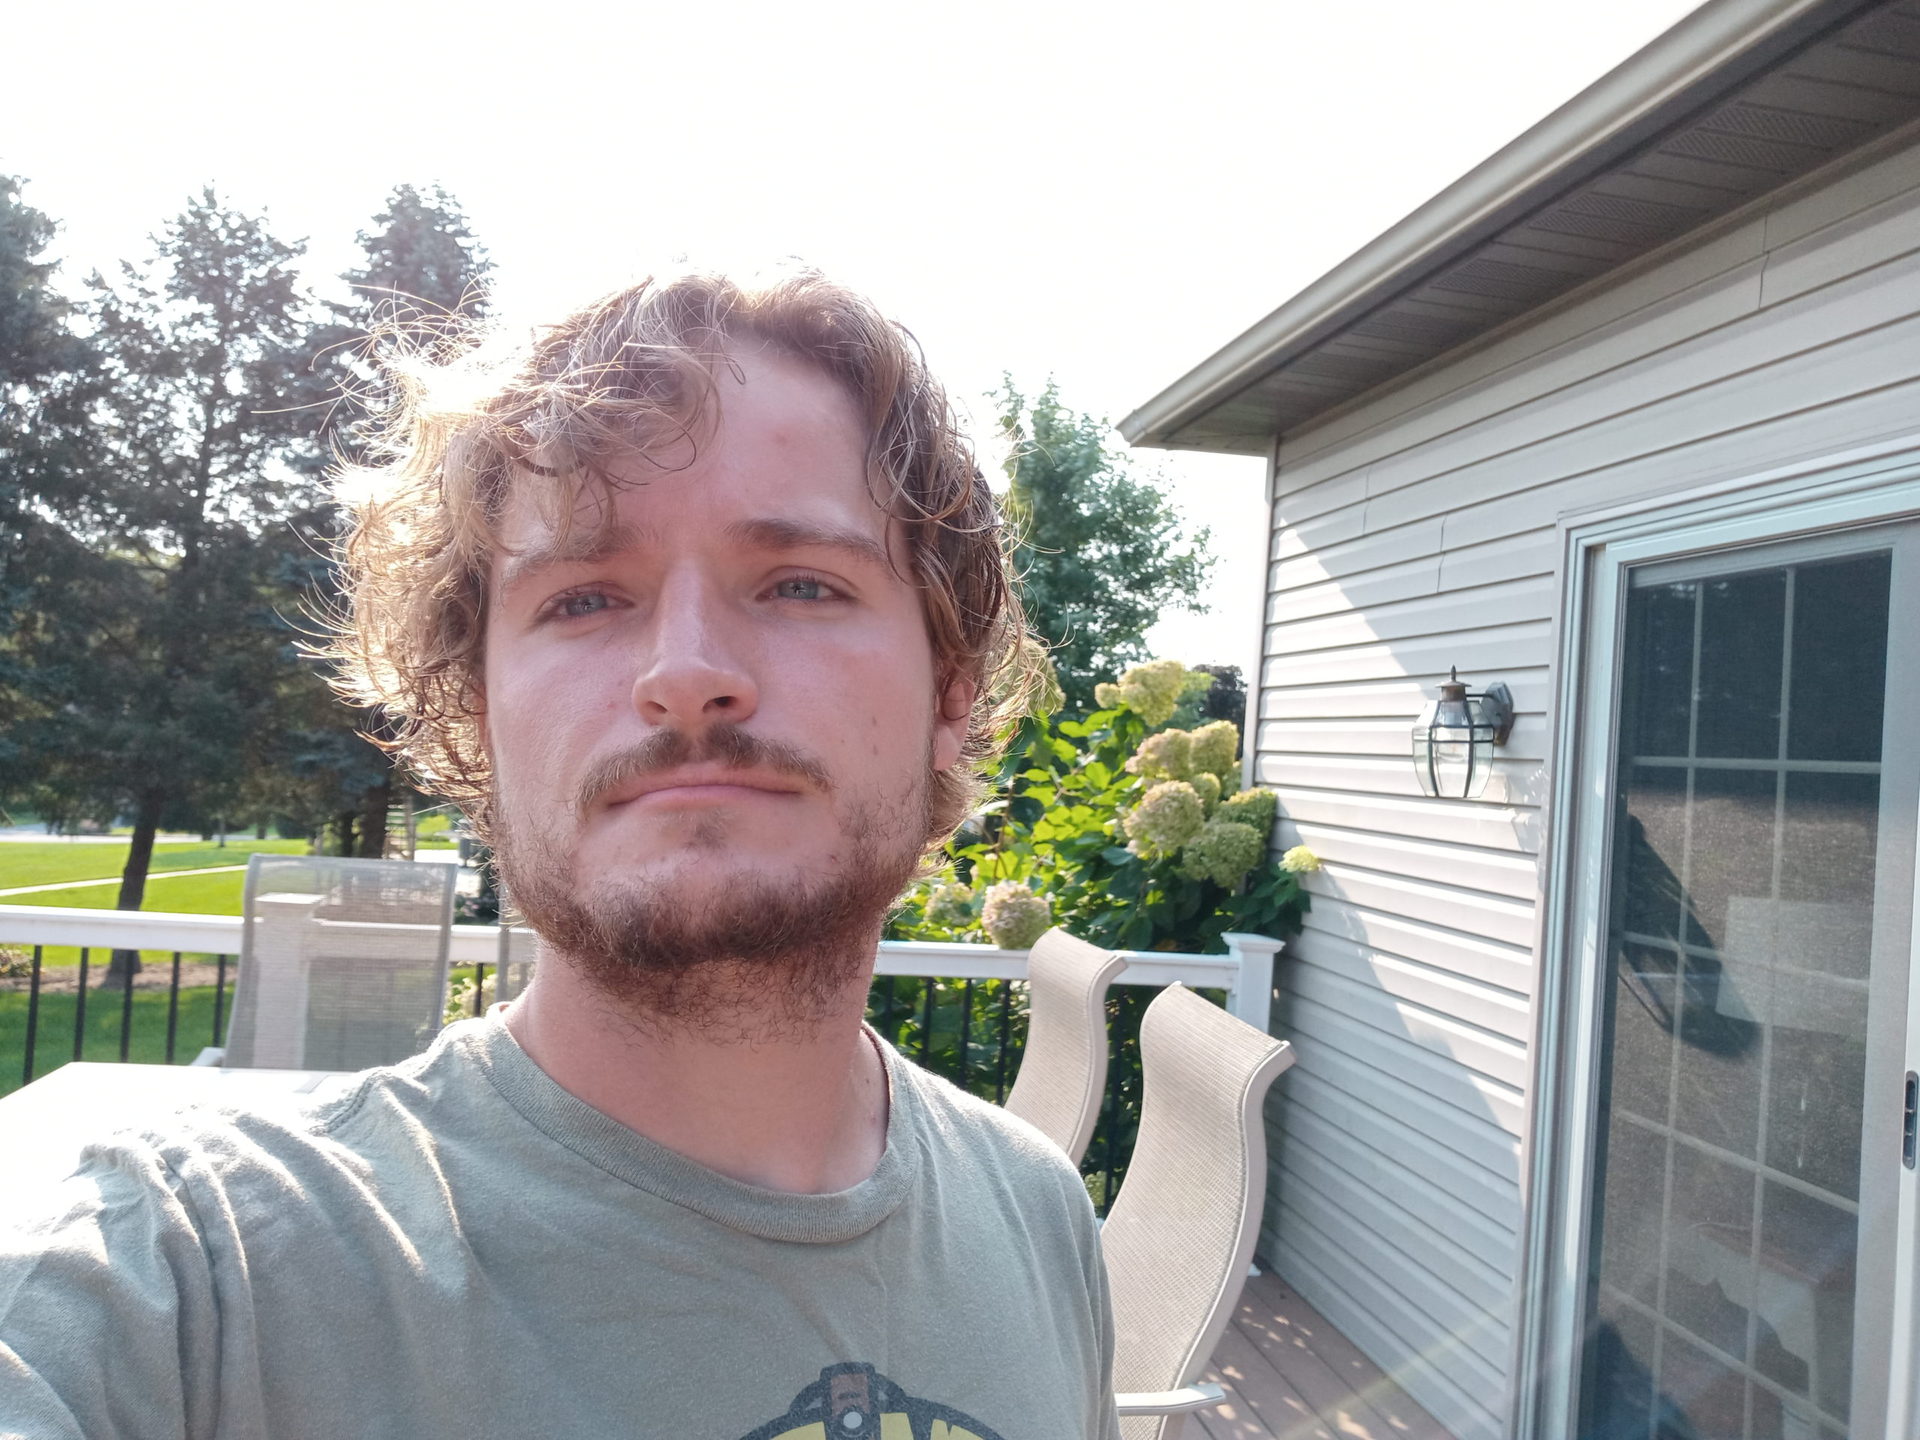 A standard selfie taken with the LG Reflect of a man with light hair and facial hair wearing a grey t-shirt, taken outdoors.